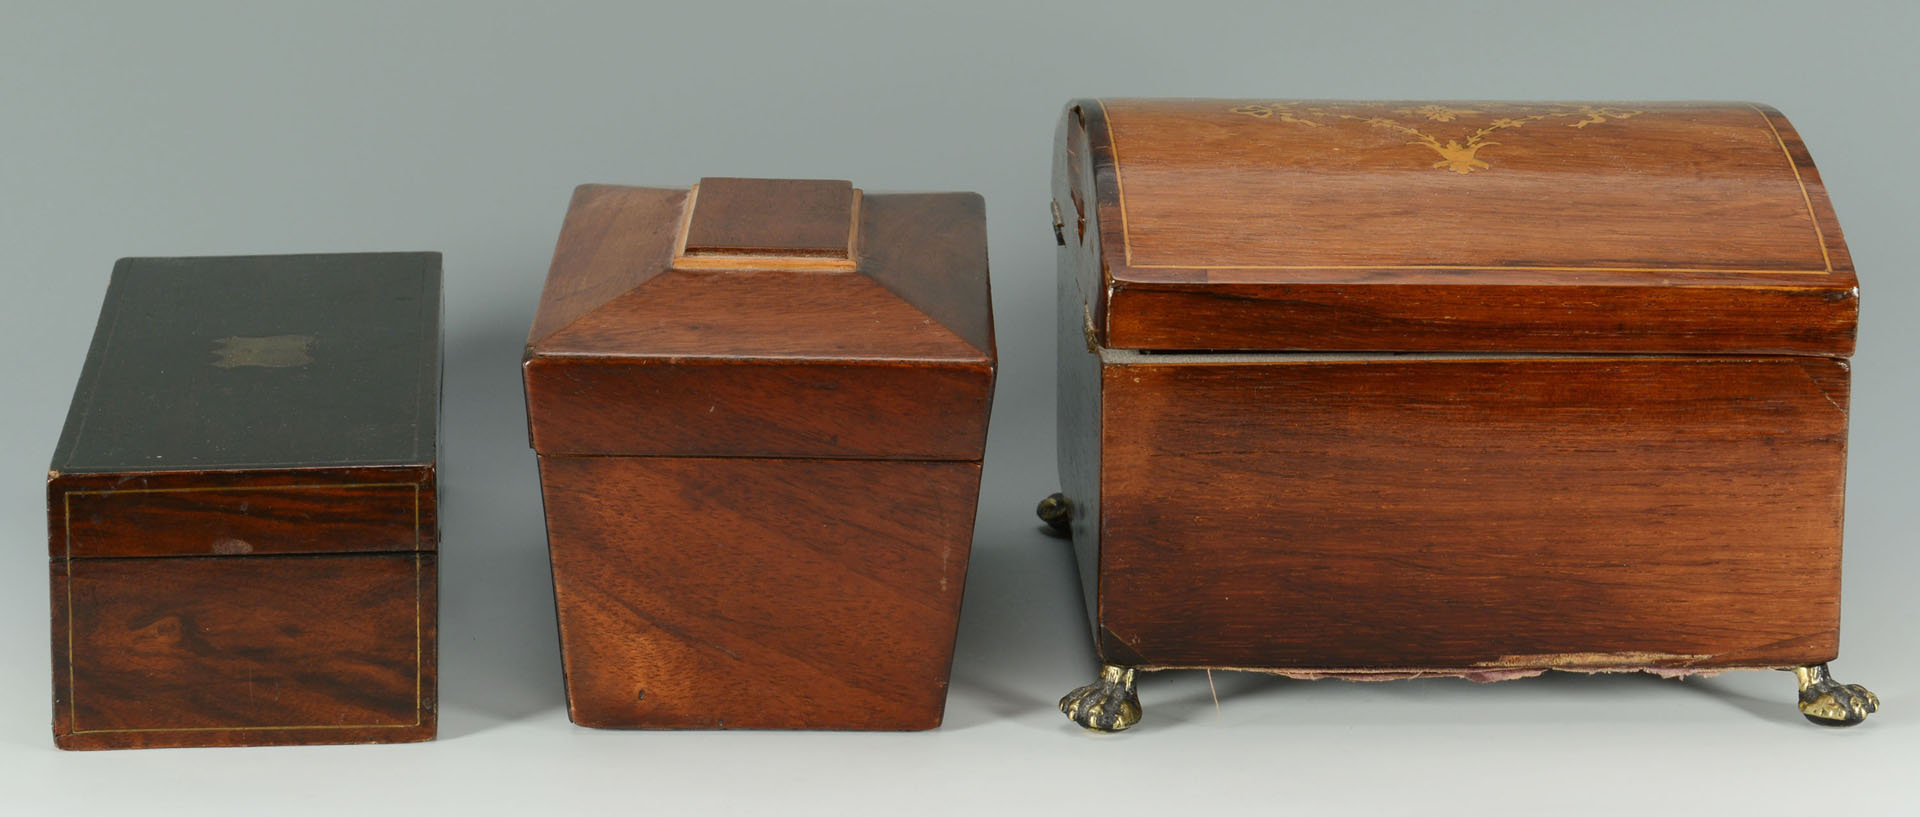 Lot 126: Grouping of 3 Desk Storage Boxes, inlaid